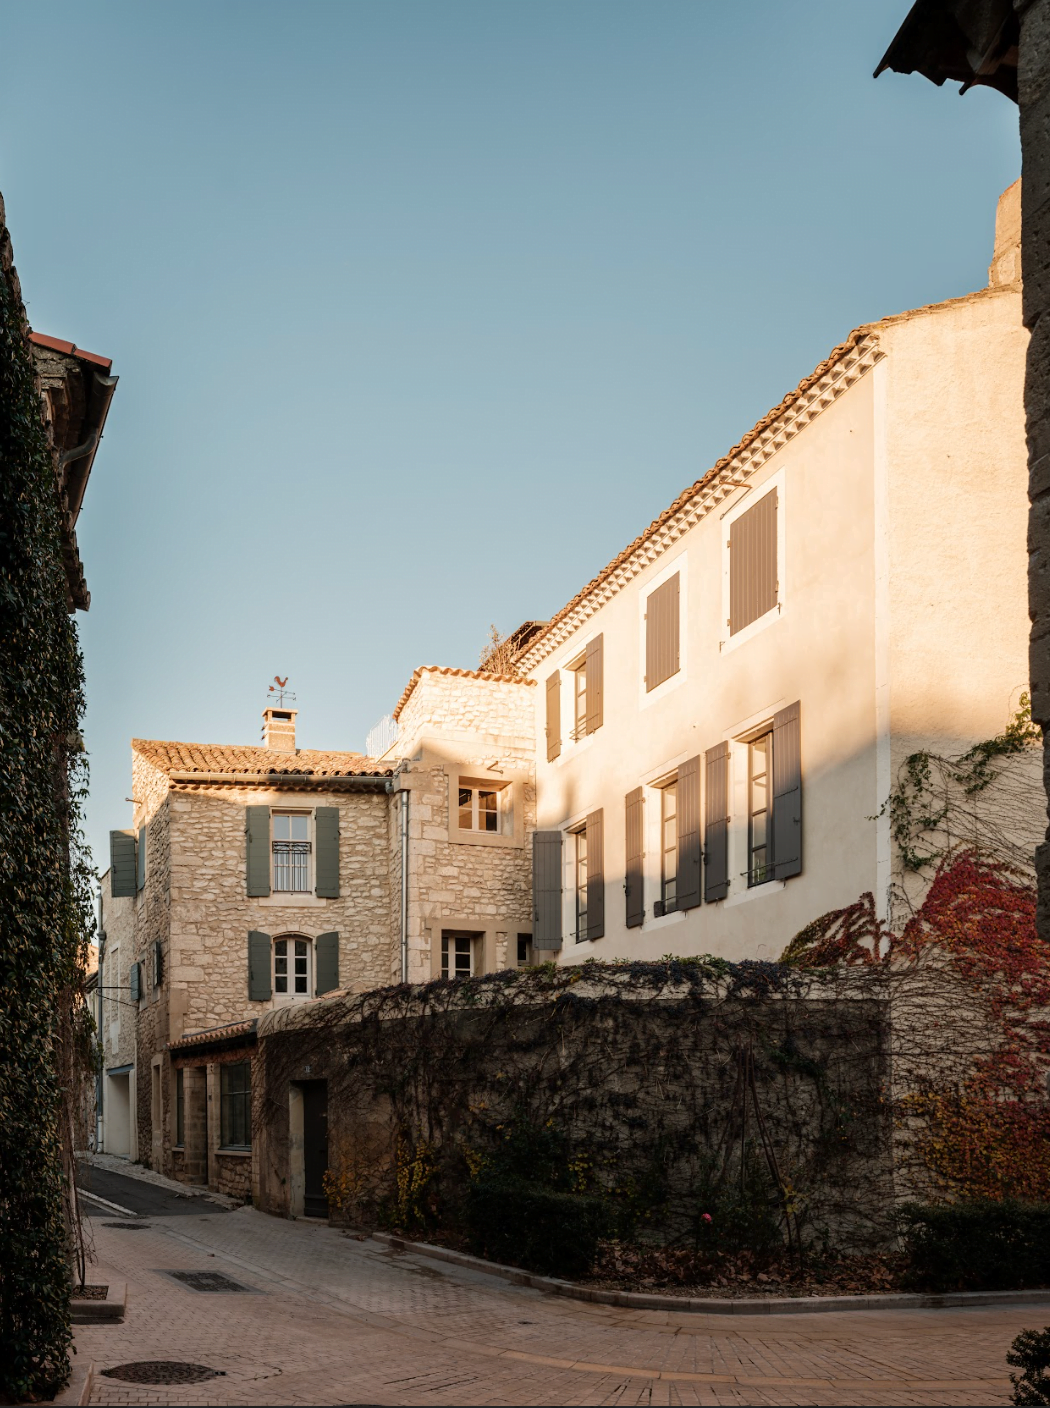 The view from outside of the Maison des Remparts: stone houses.